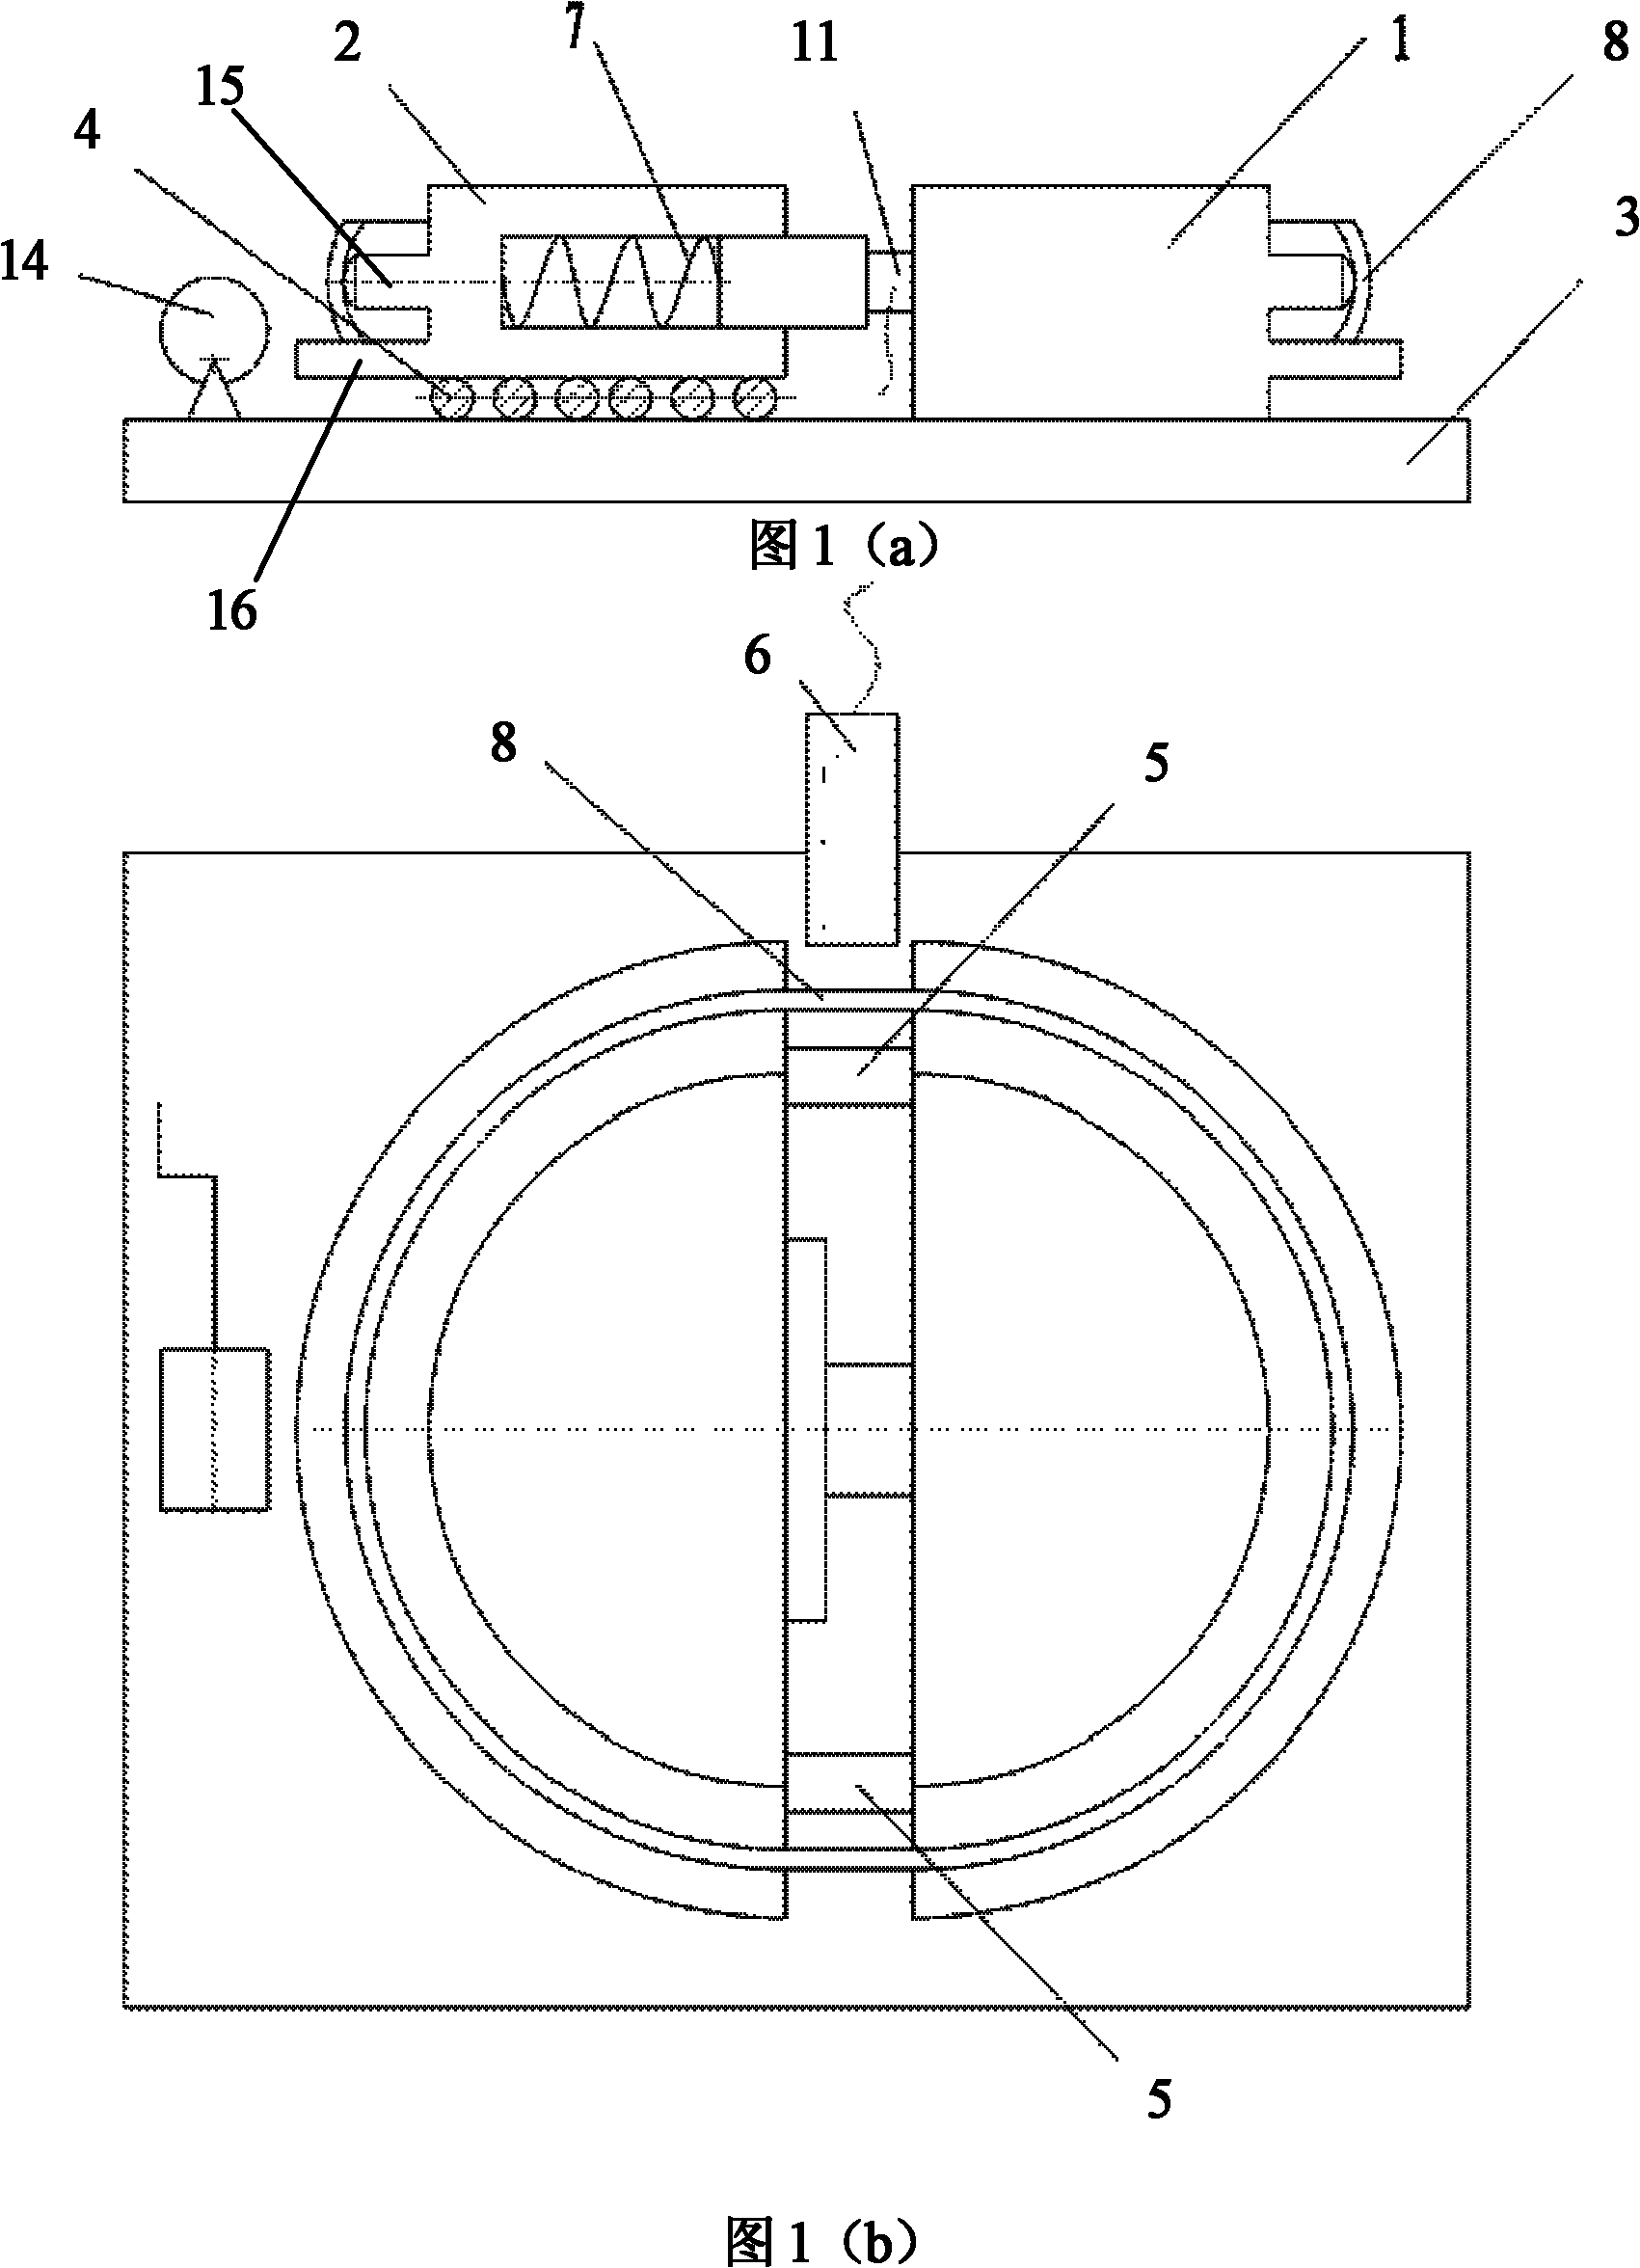 Measurement apparatus of metal band steel ring for continuously variable transmission